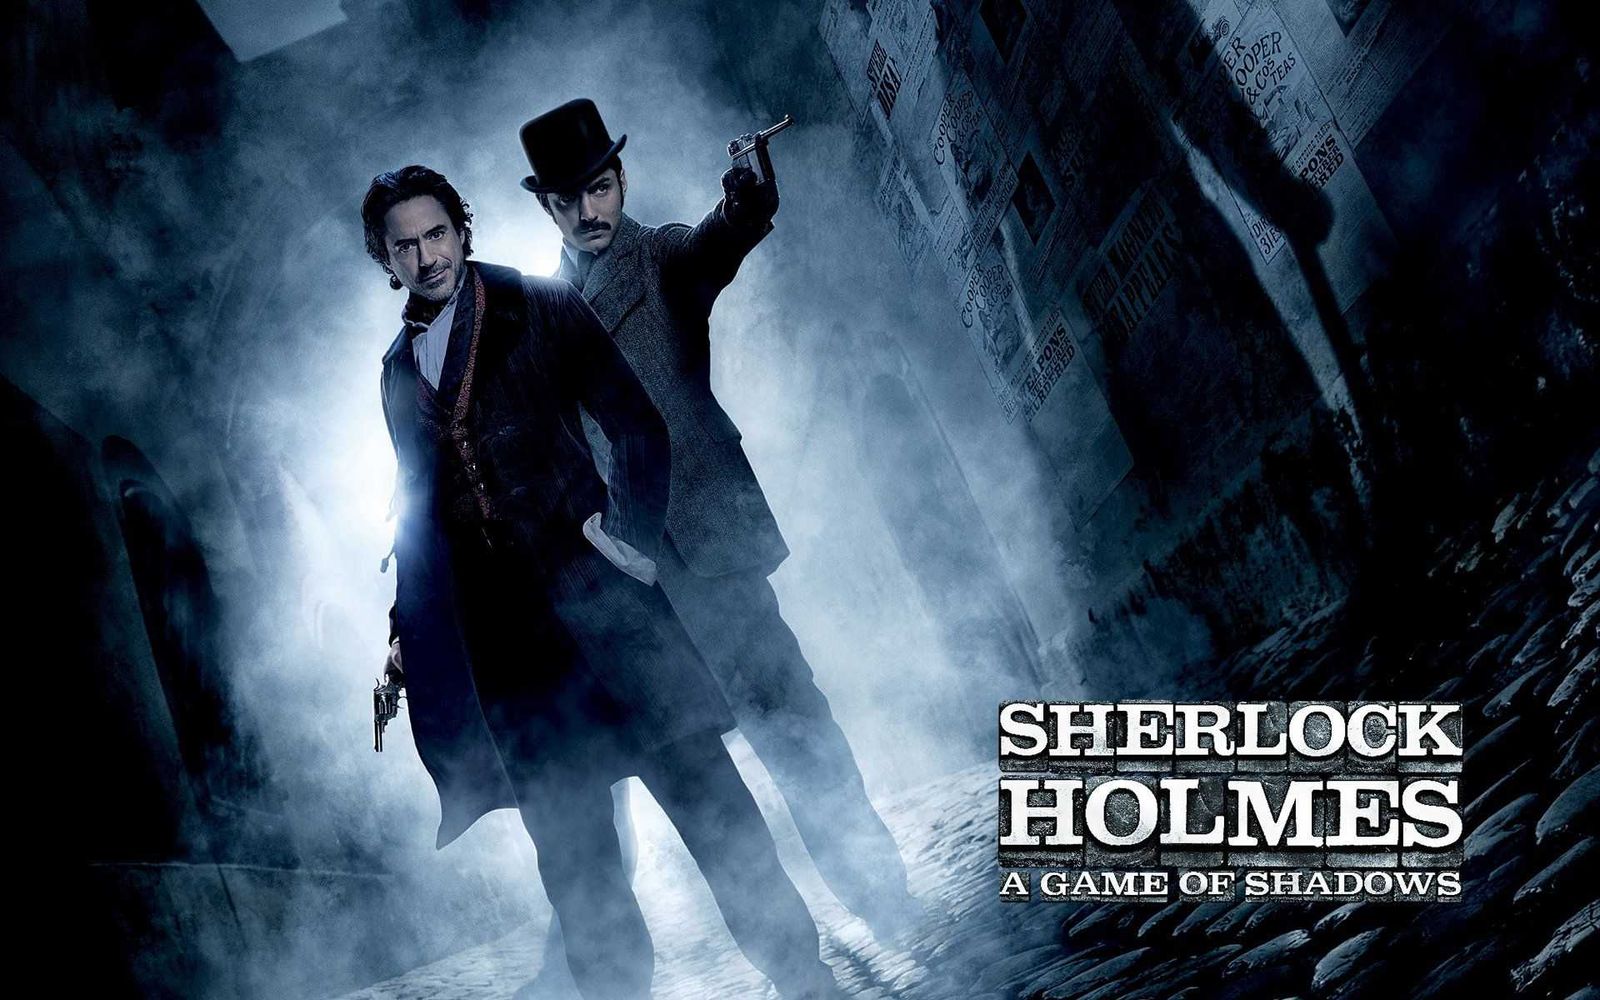 'The ball's in his court': RDJ takes charge, but where's Sherlock Holmes 3?